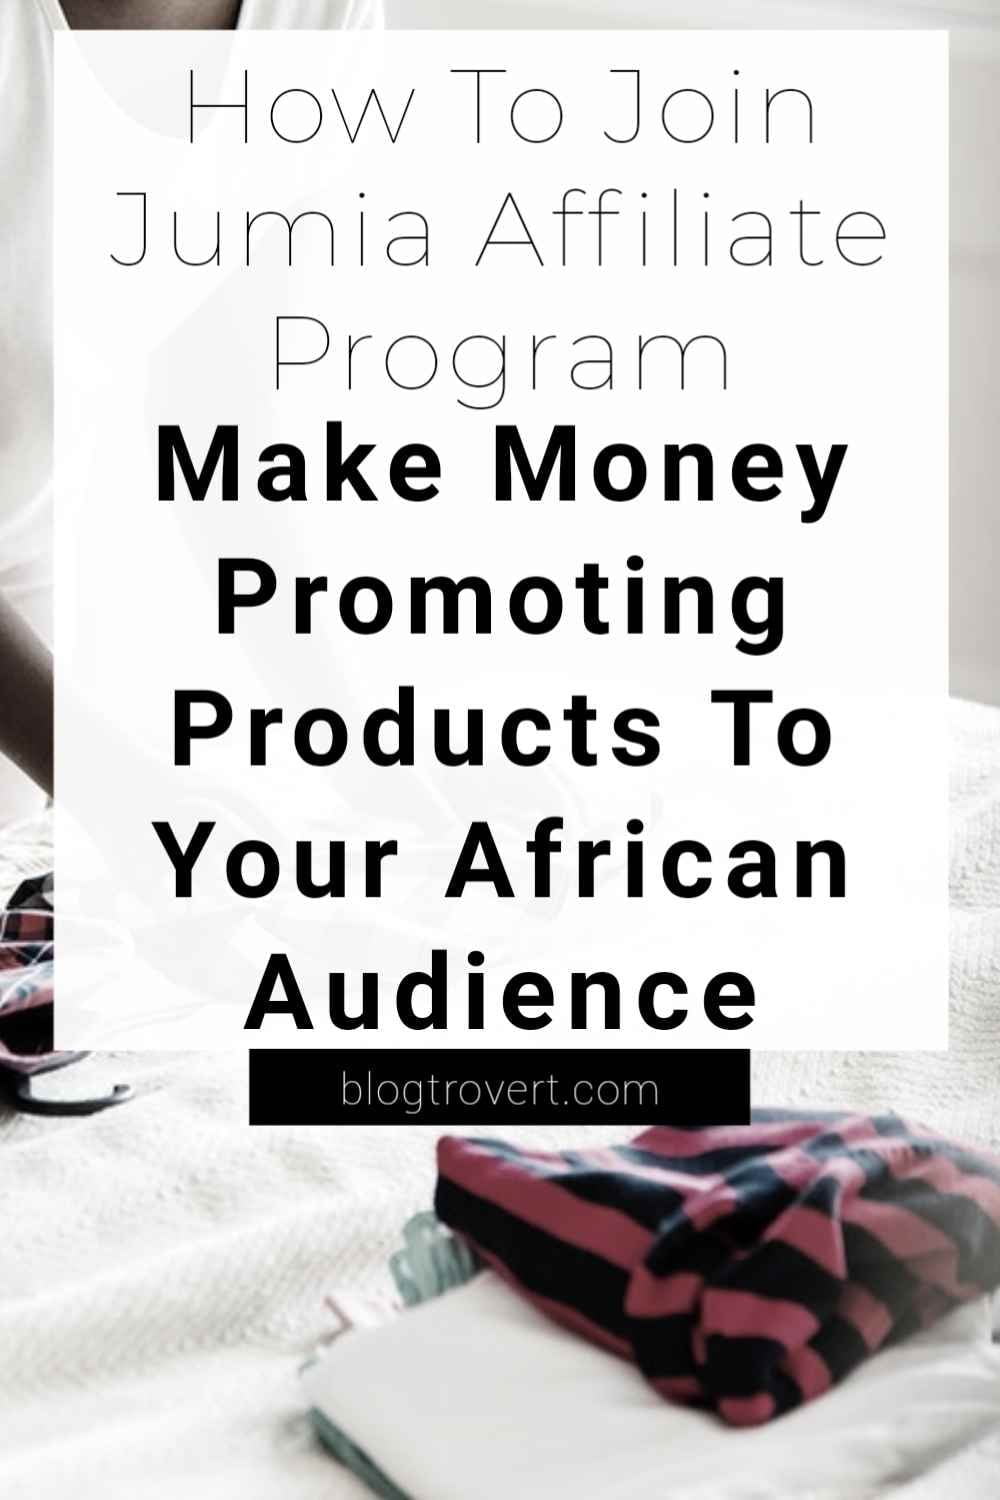 How to join Jumia affiliate program - a step-by-step guide 3